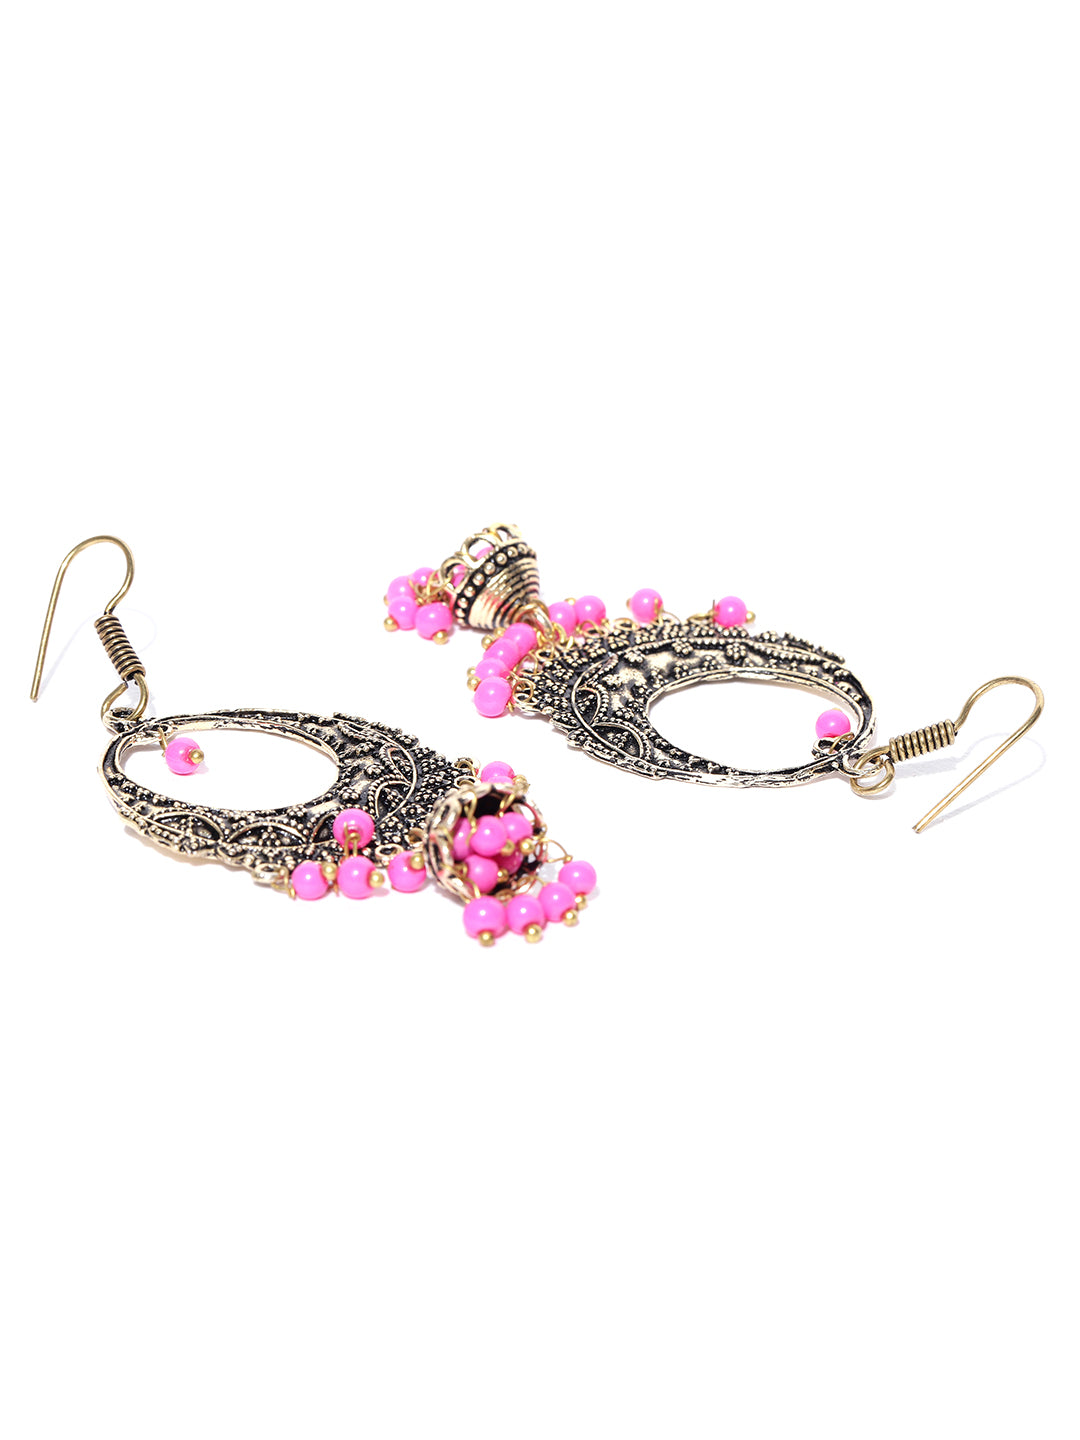 Rose Cut Pink Tourmaline Dangle Earrings with imported Silver Indian Dangles  & Bells | diana alexander design